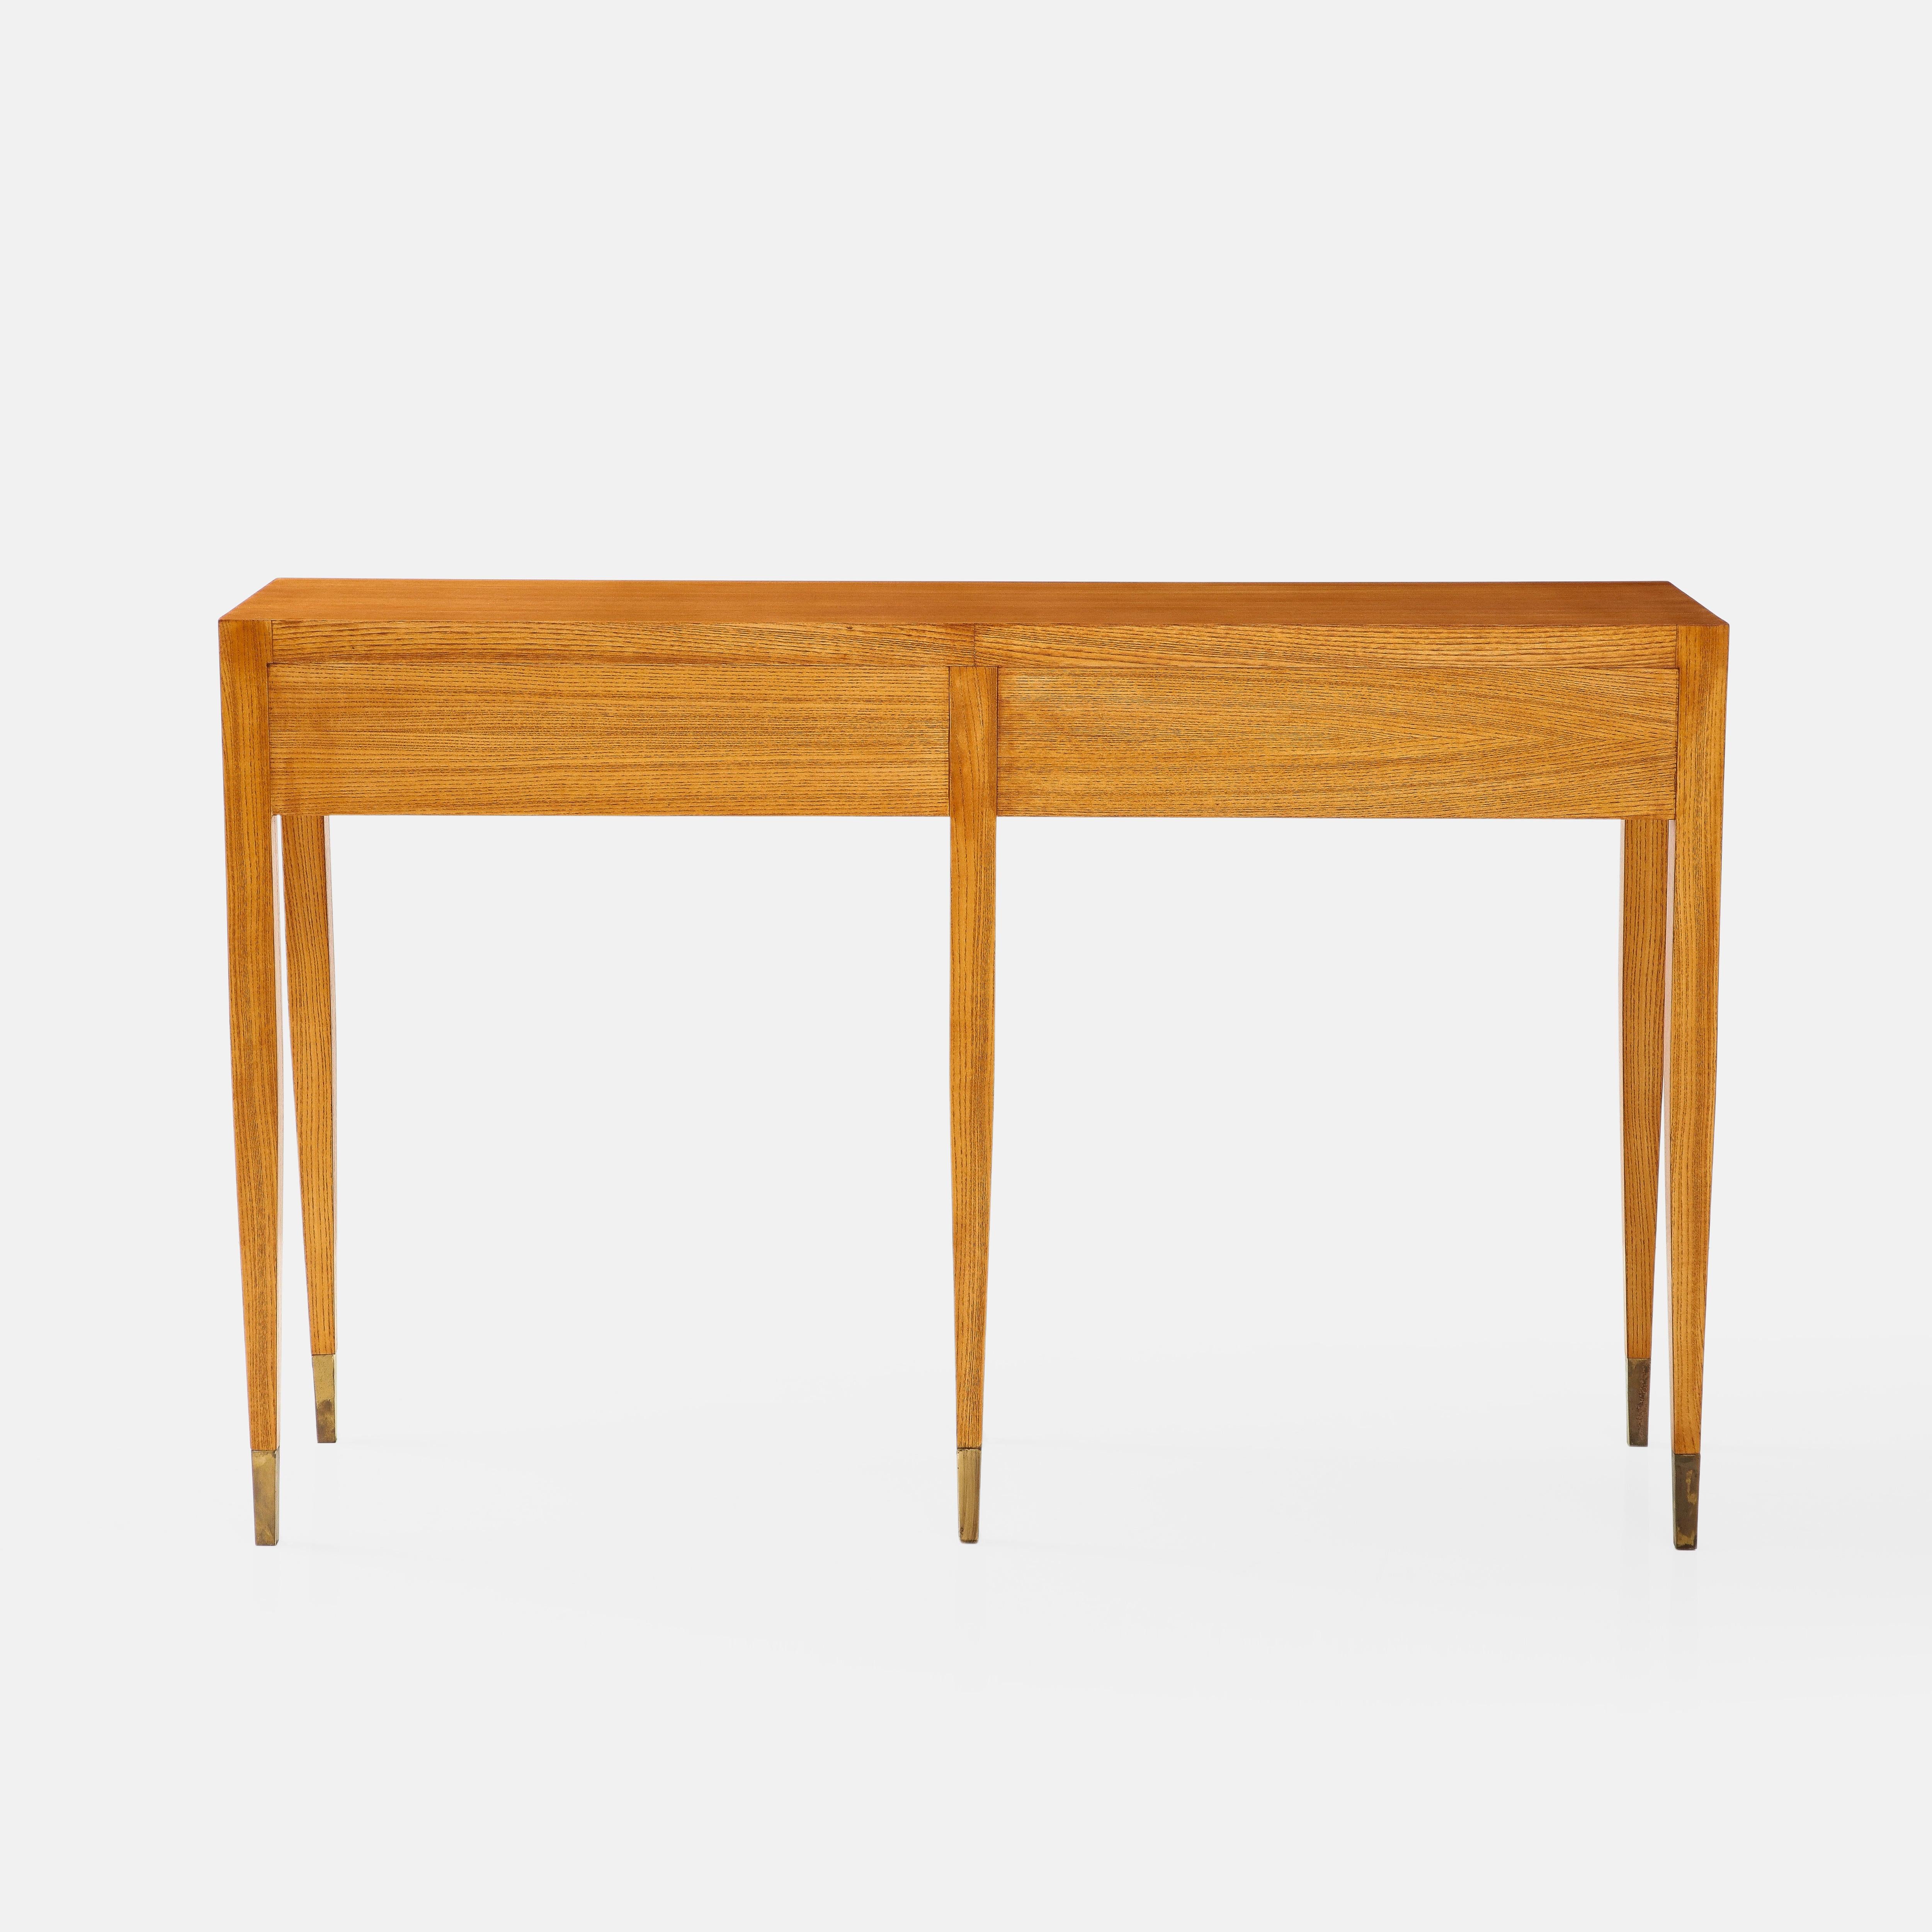 Mid-20th Century Gio Ponti for Giordano Chiesa Rare Pair of Ash Wood Consoles, Italy, 1950s For Sale